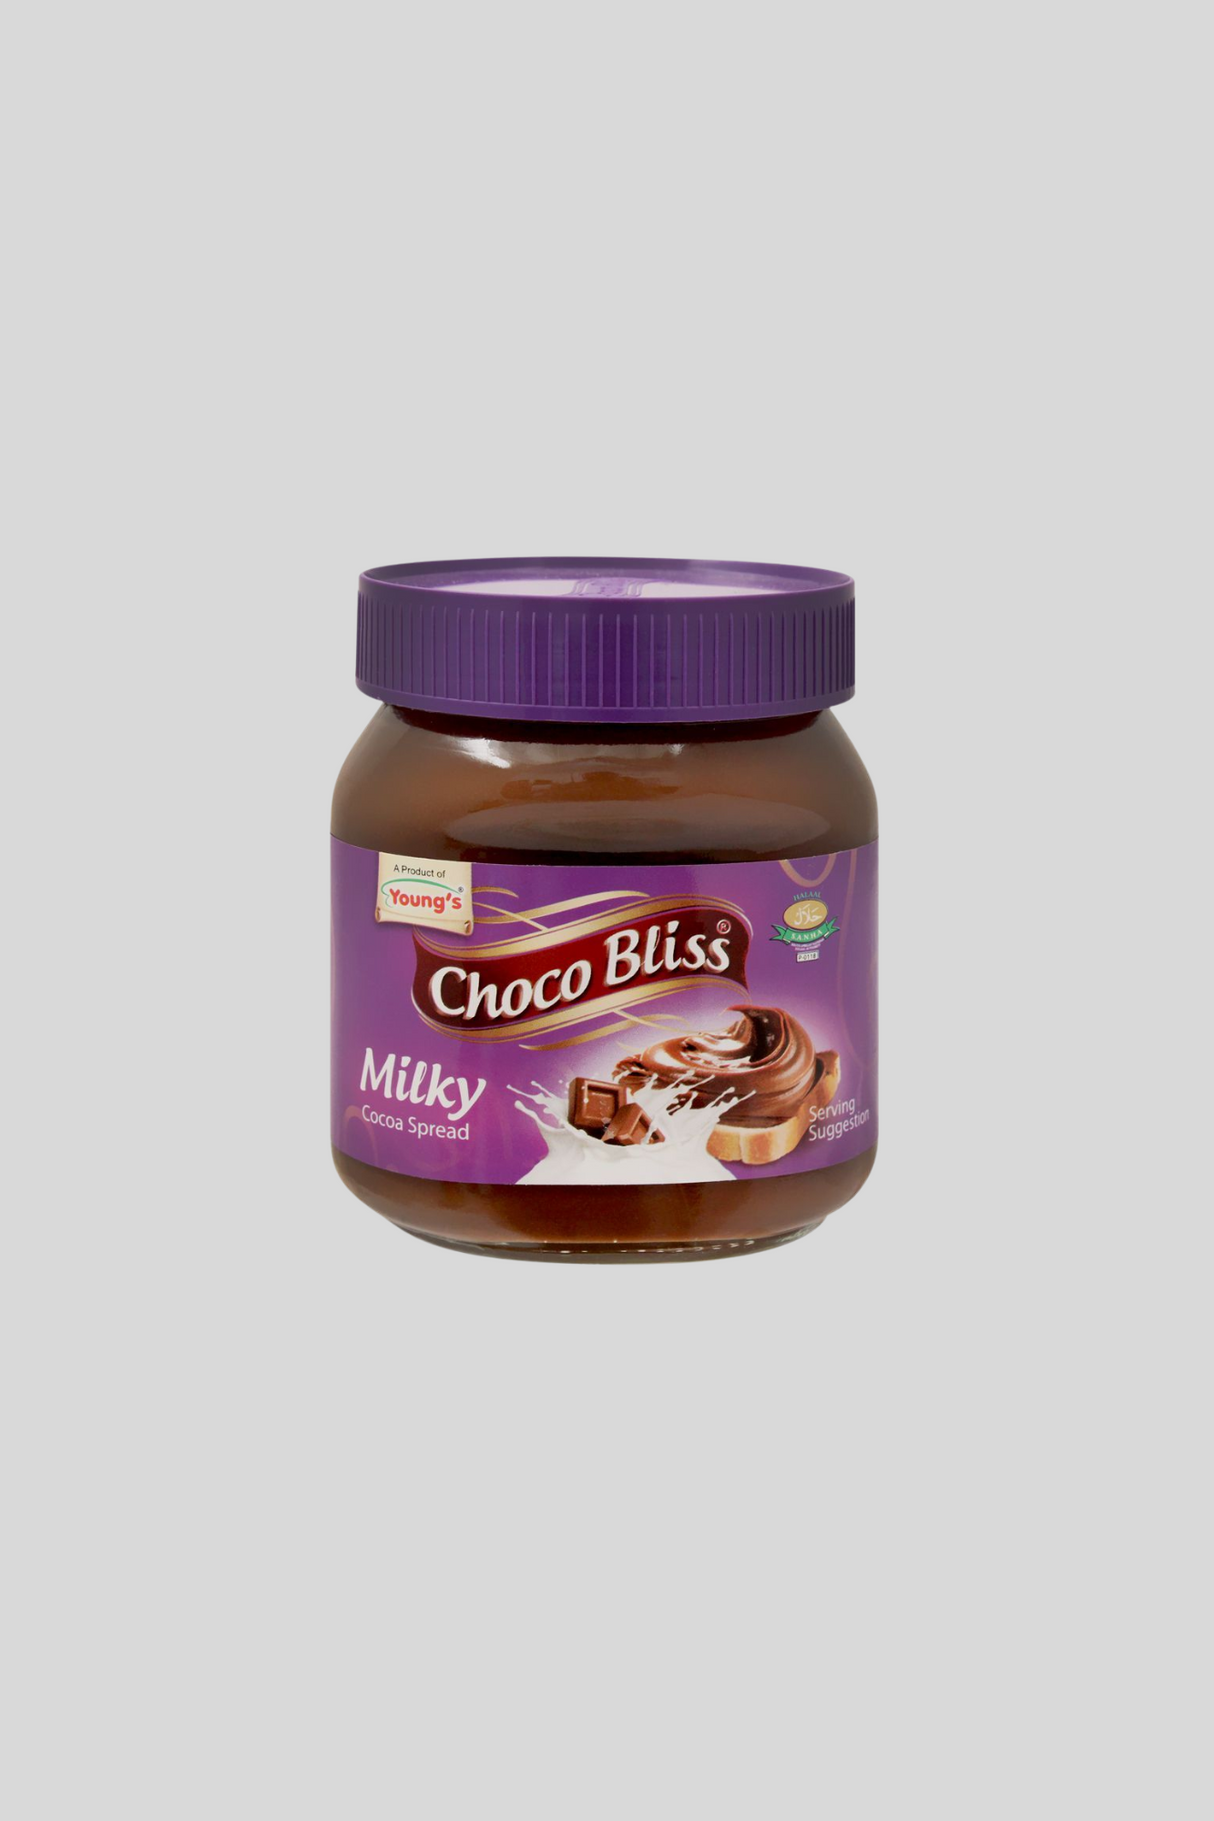 youngs choco bliss milky cocoa spread 350g